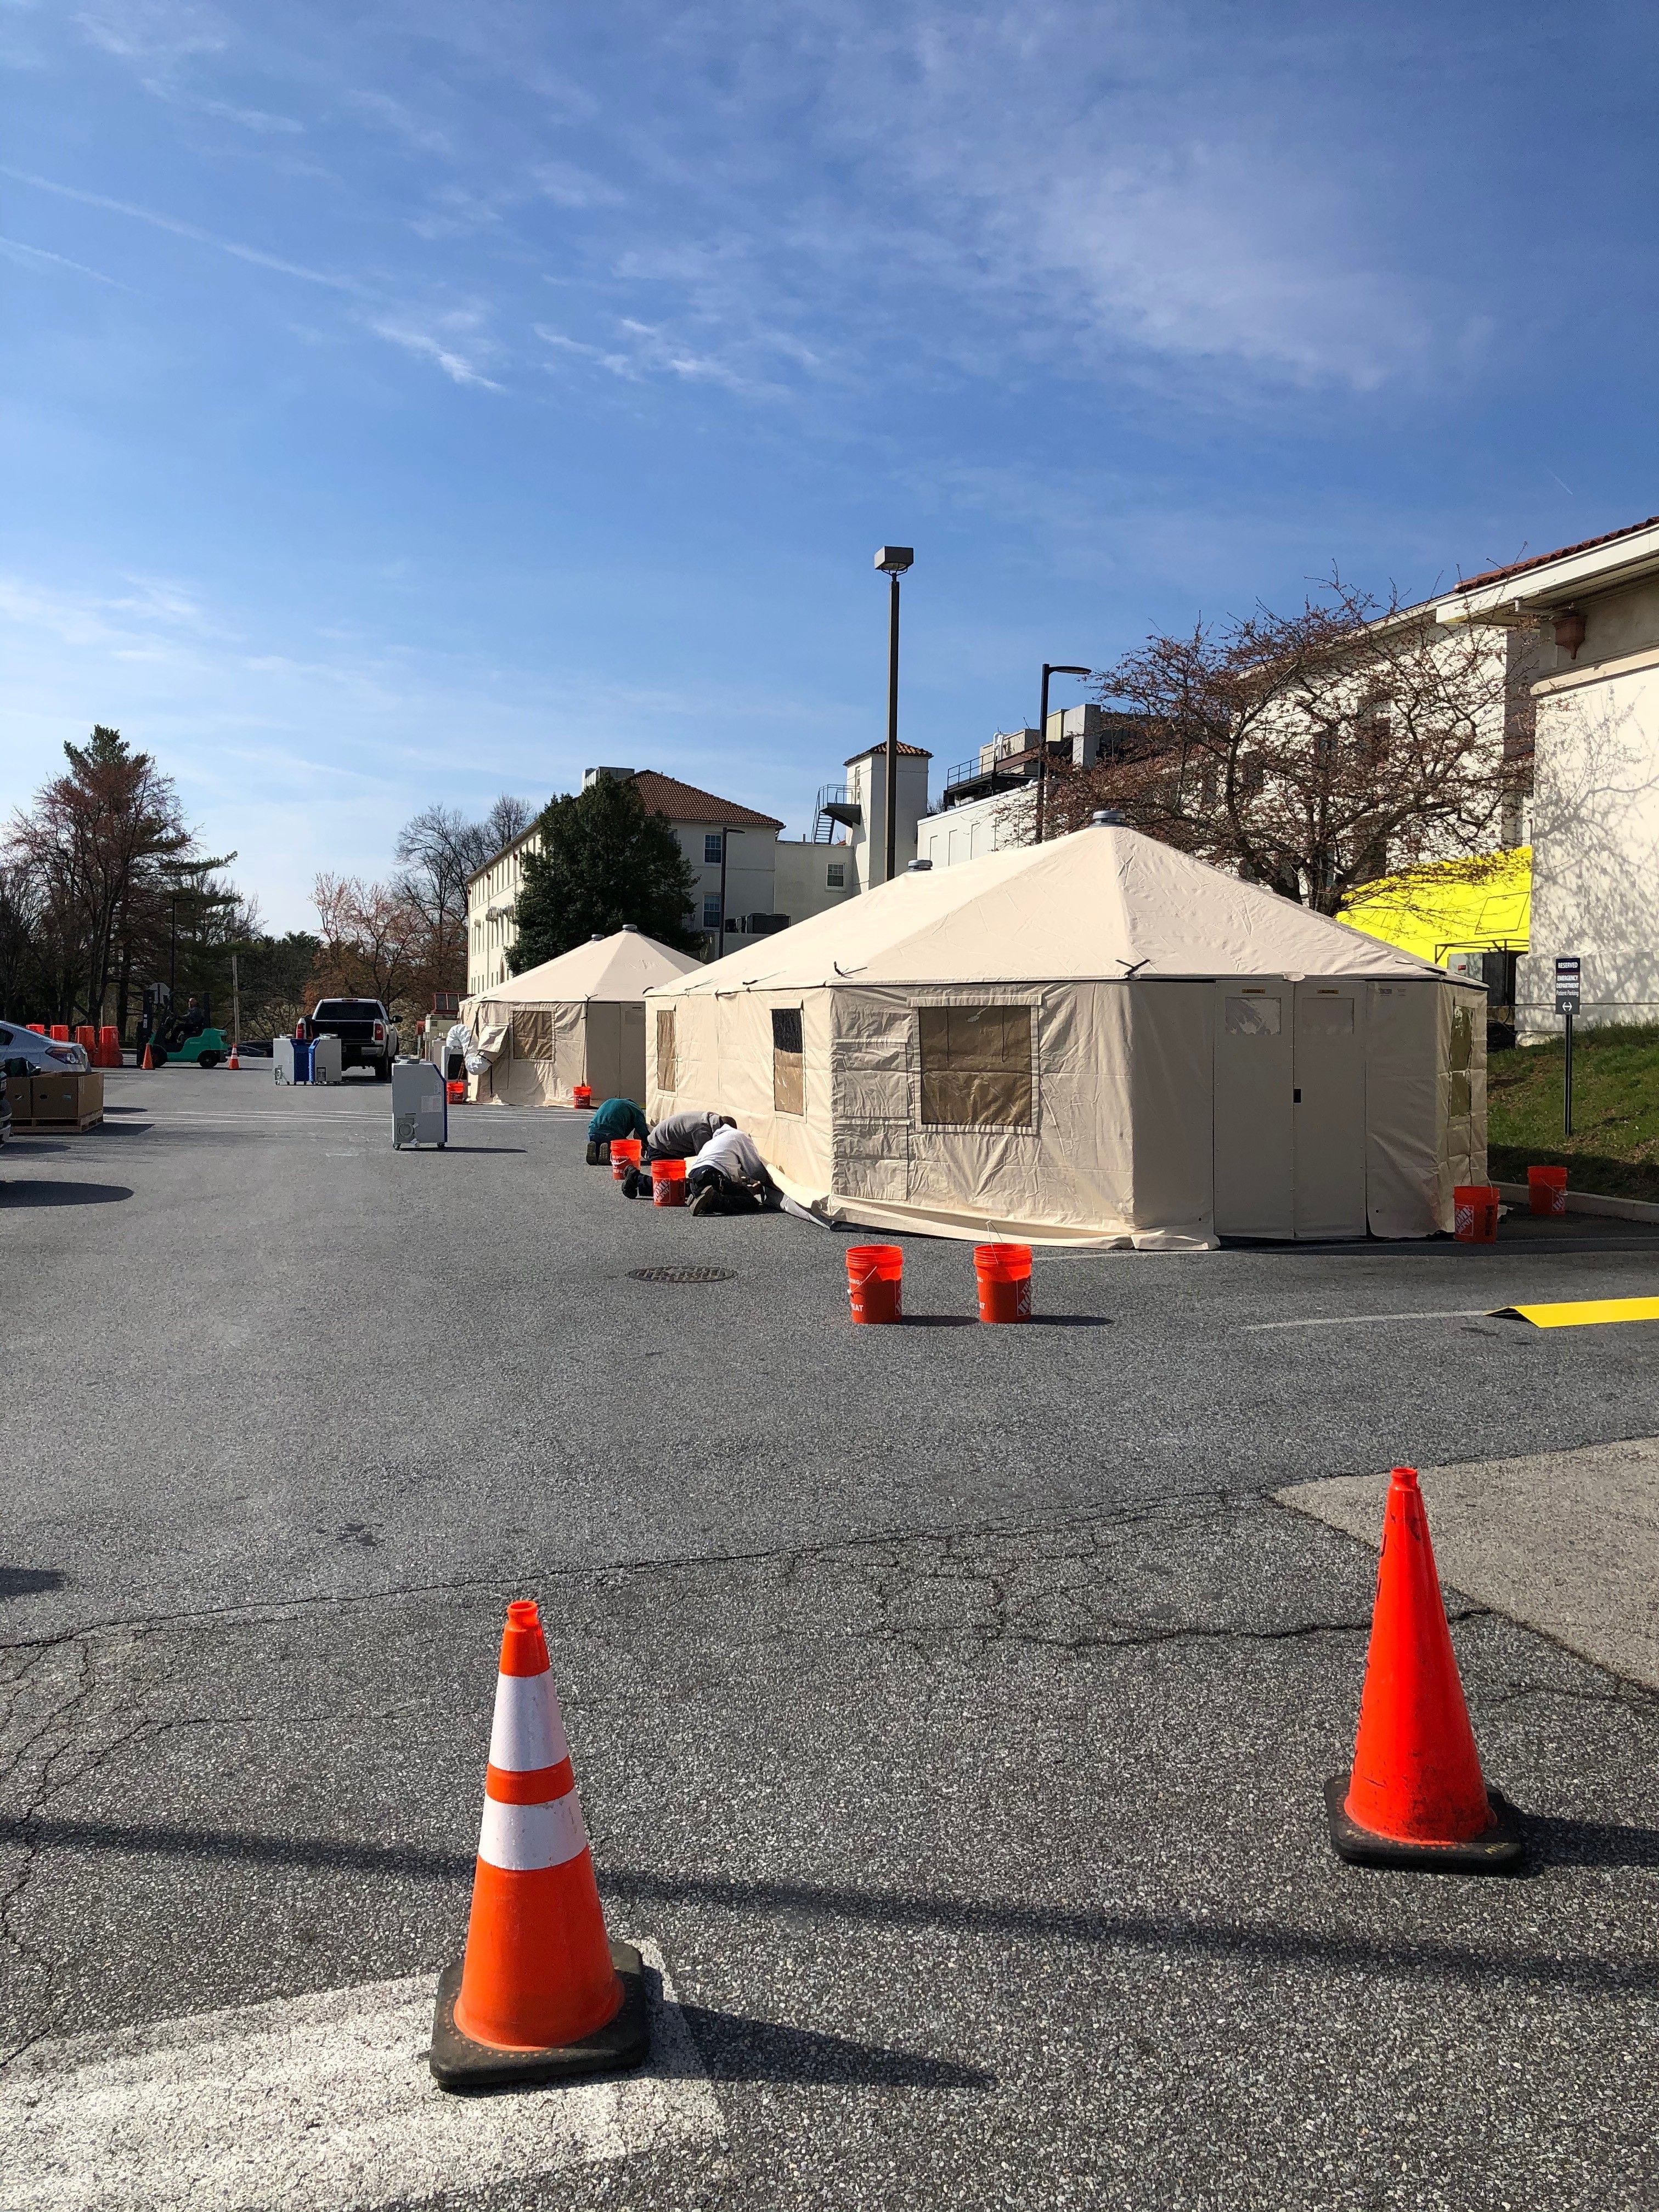 Temporary tents in a parking lot, with some neon orange cones and several neon orange buckets.